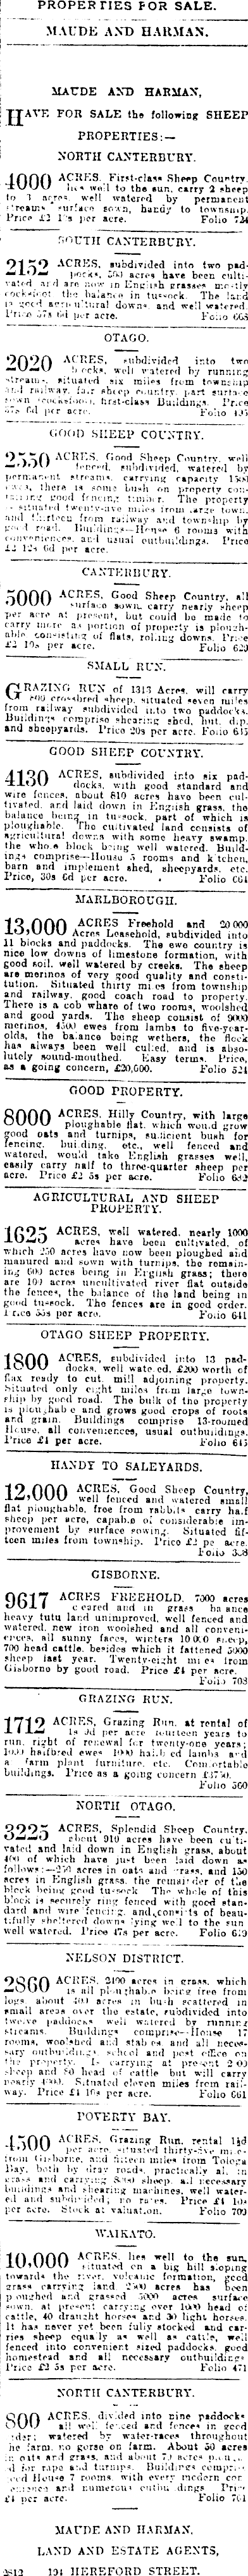 Papers Past Newspapers Press 7 November 1906 Page 11 Advertisements Column 2